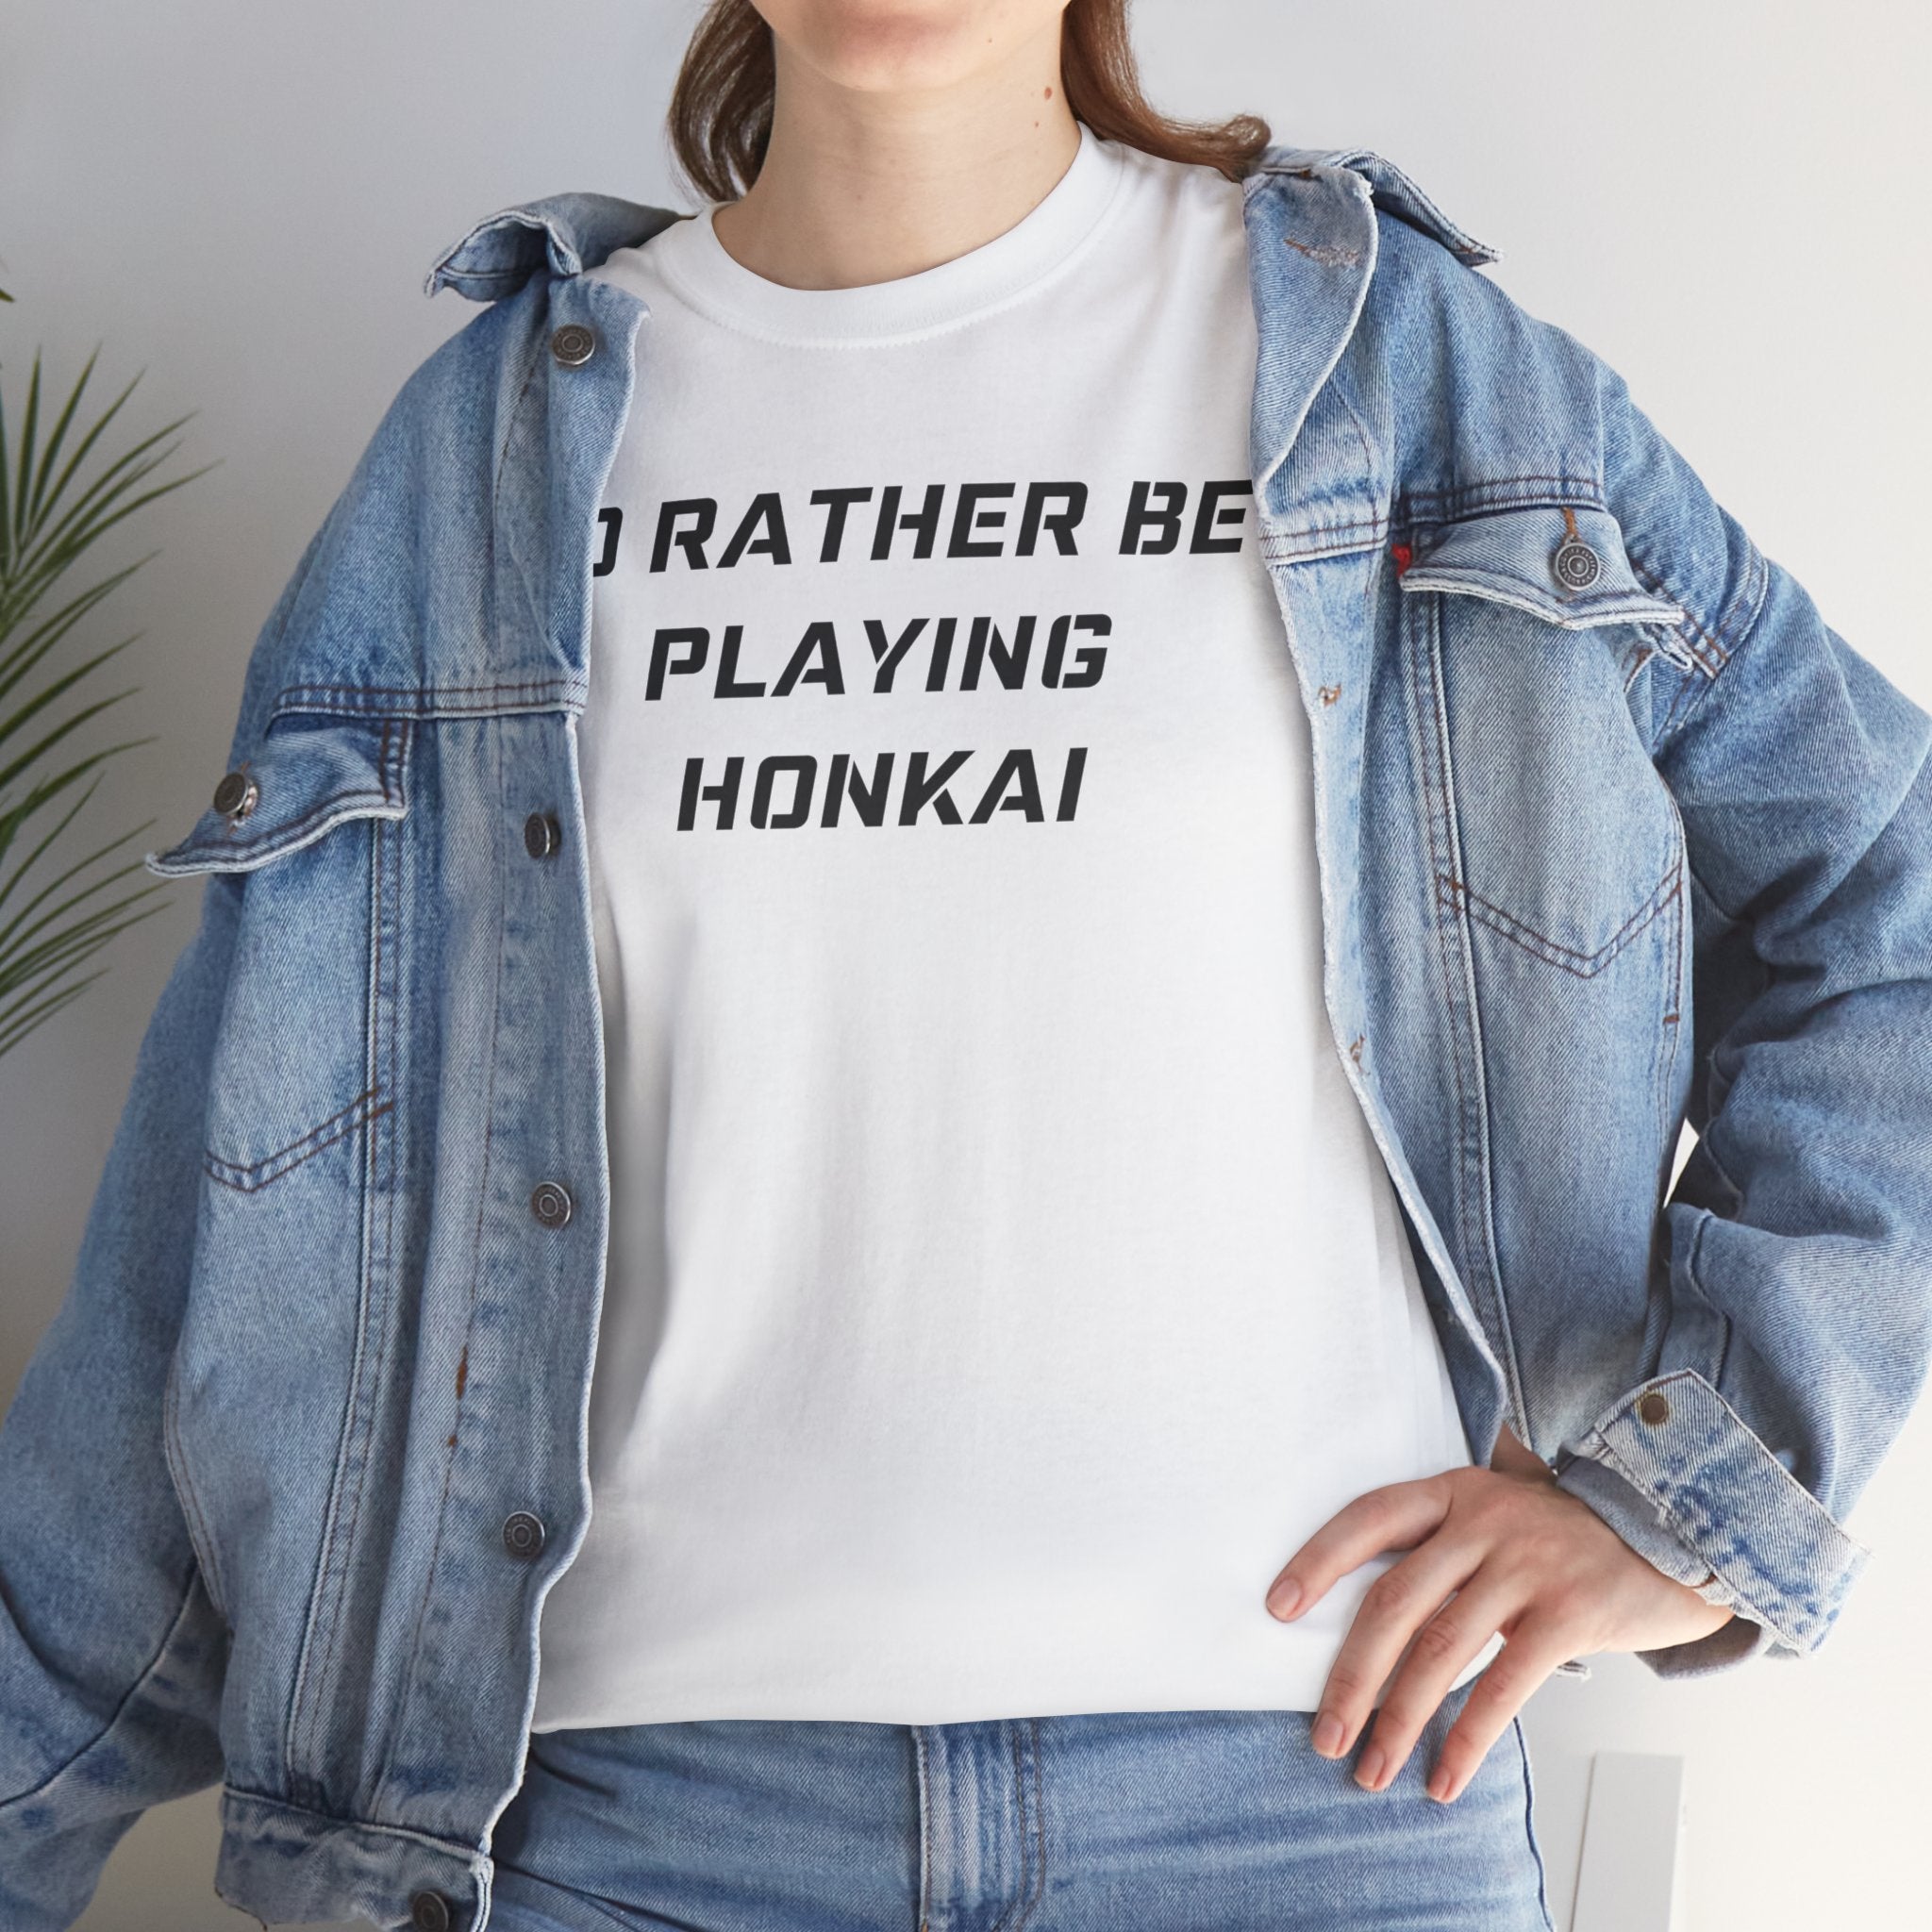 Honkai I'd Rather Be Playing Unisex Heavy Cotton Tee Impact Starrail Shirt Tshirt T-shirt Gamer Gift For Him Her Game Cup Cups Mugs Birthday Christmas Valentine's Anniversary Gifts